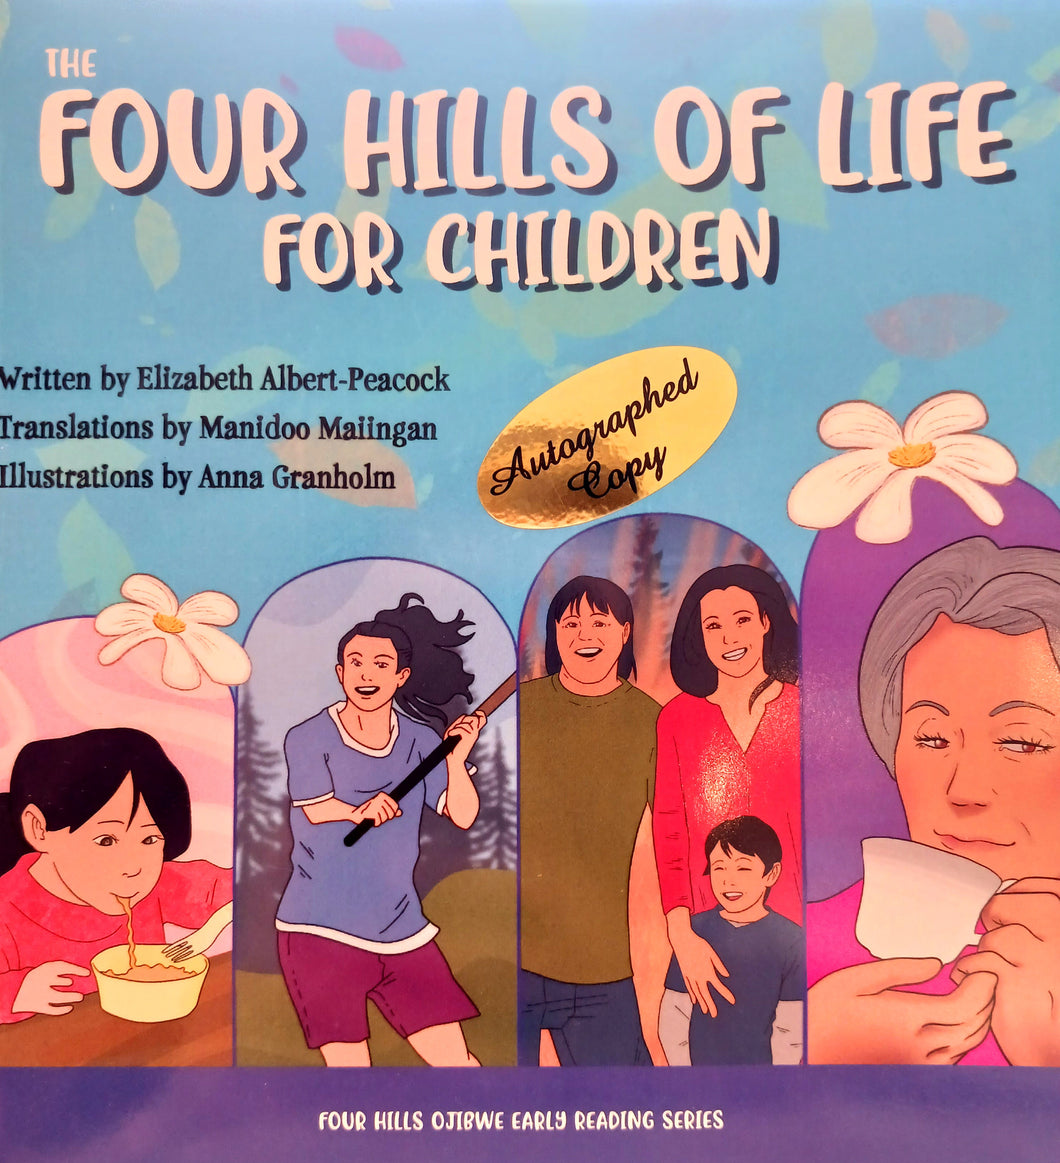 The Four Hills of Life for Children